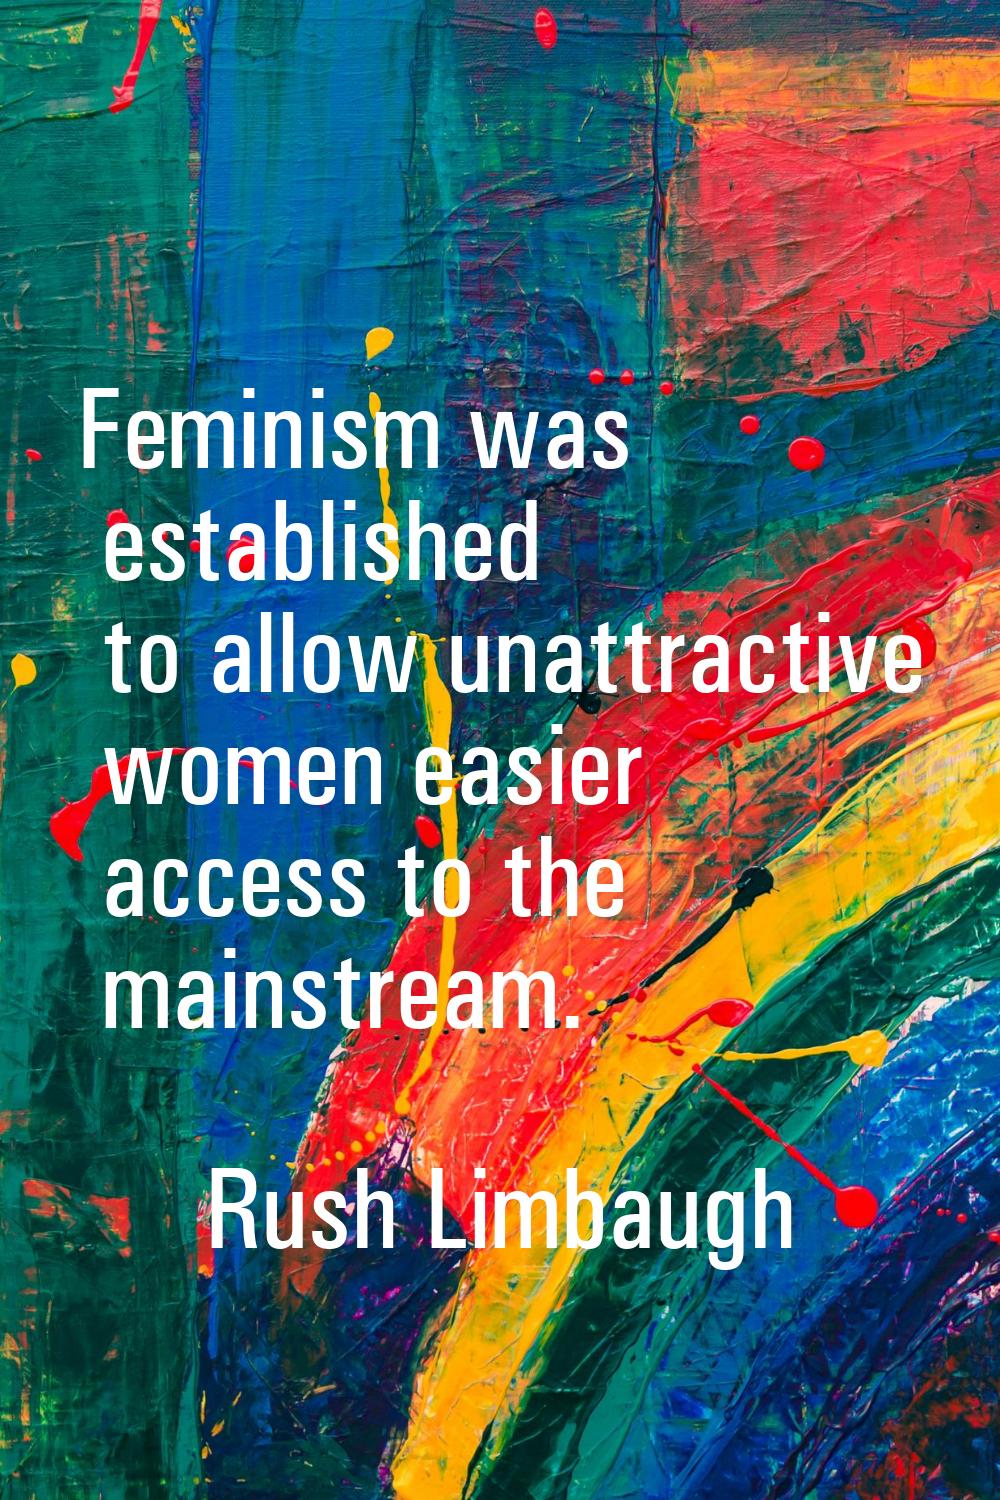 Feminism was established to allow unattractive women easier access to the mainstream.